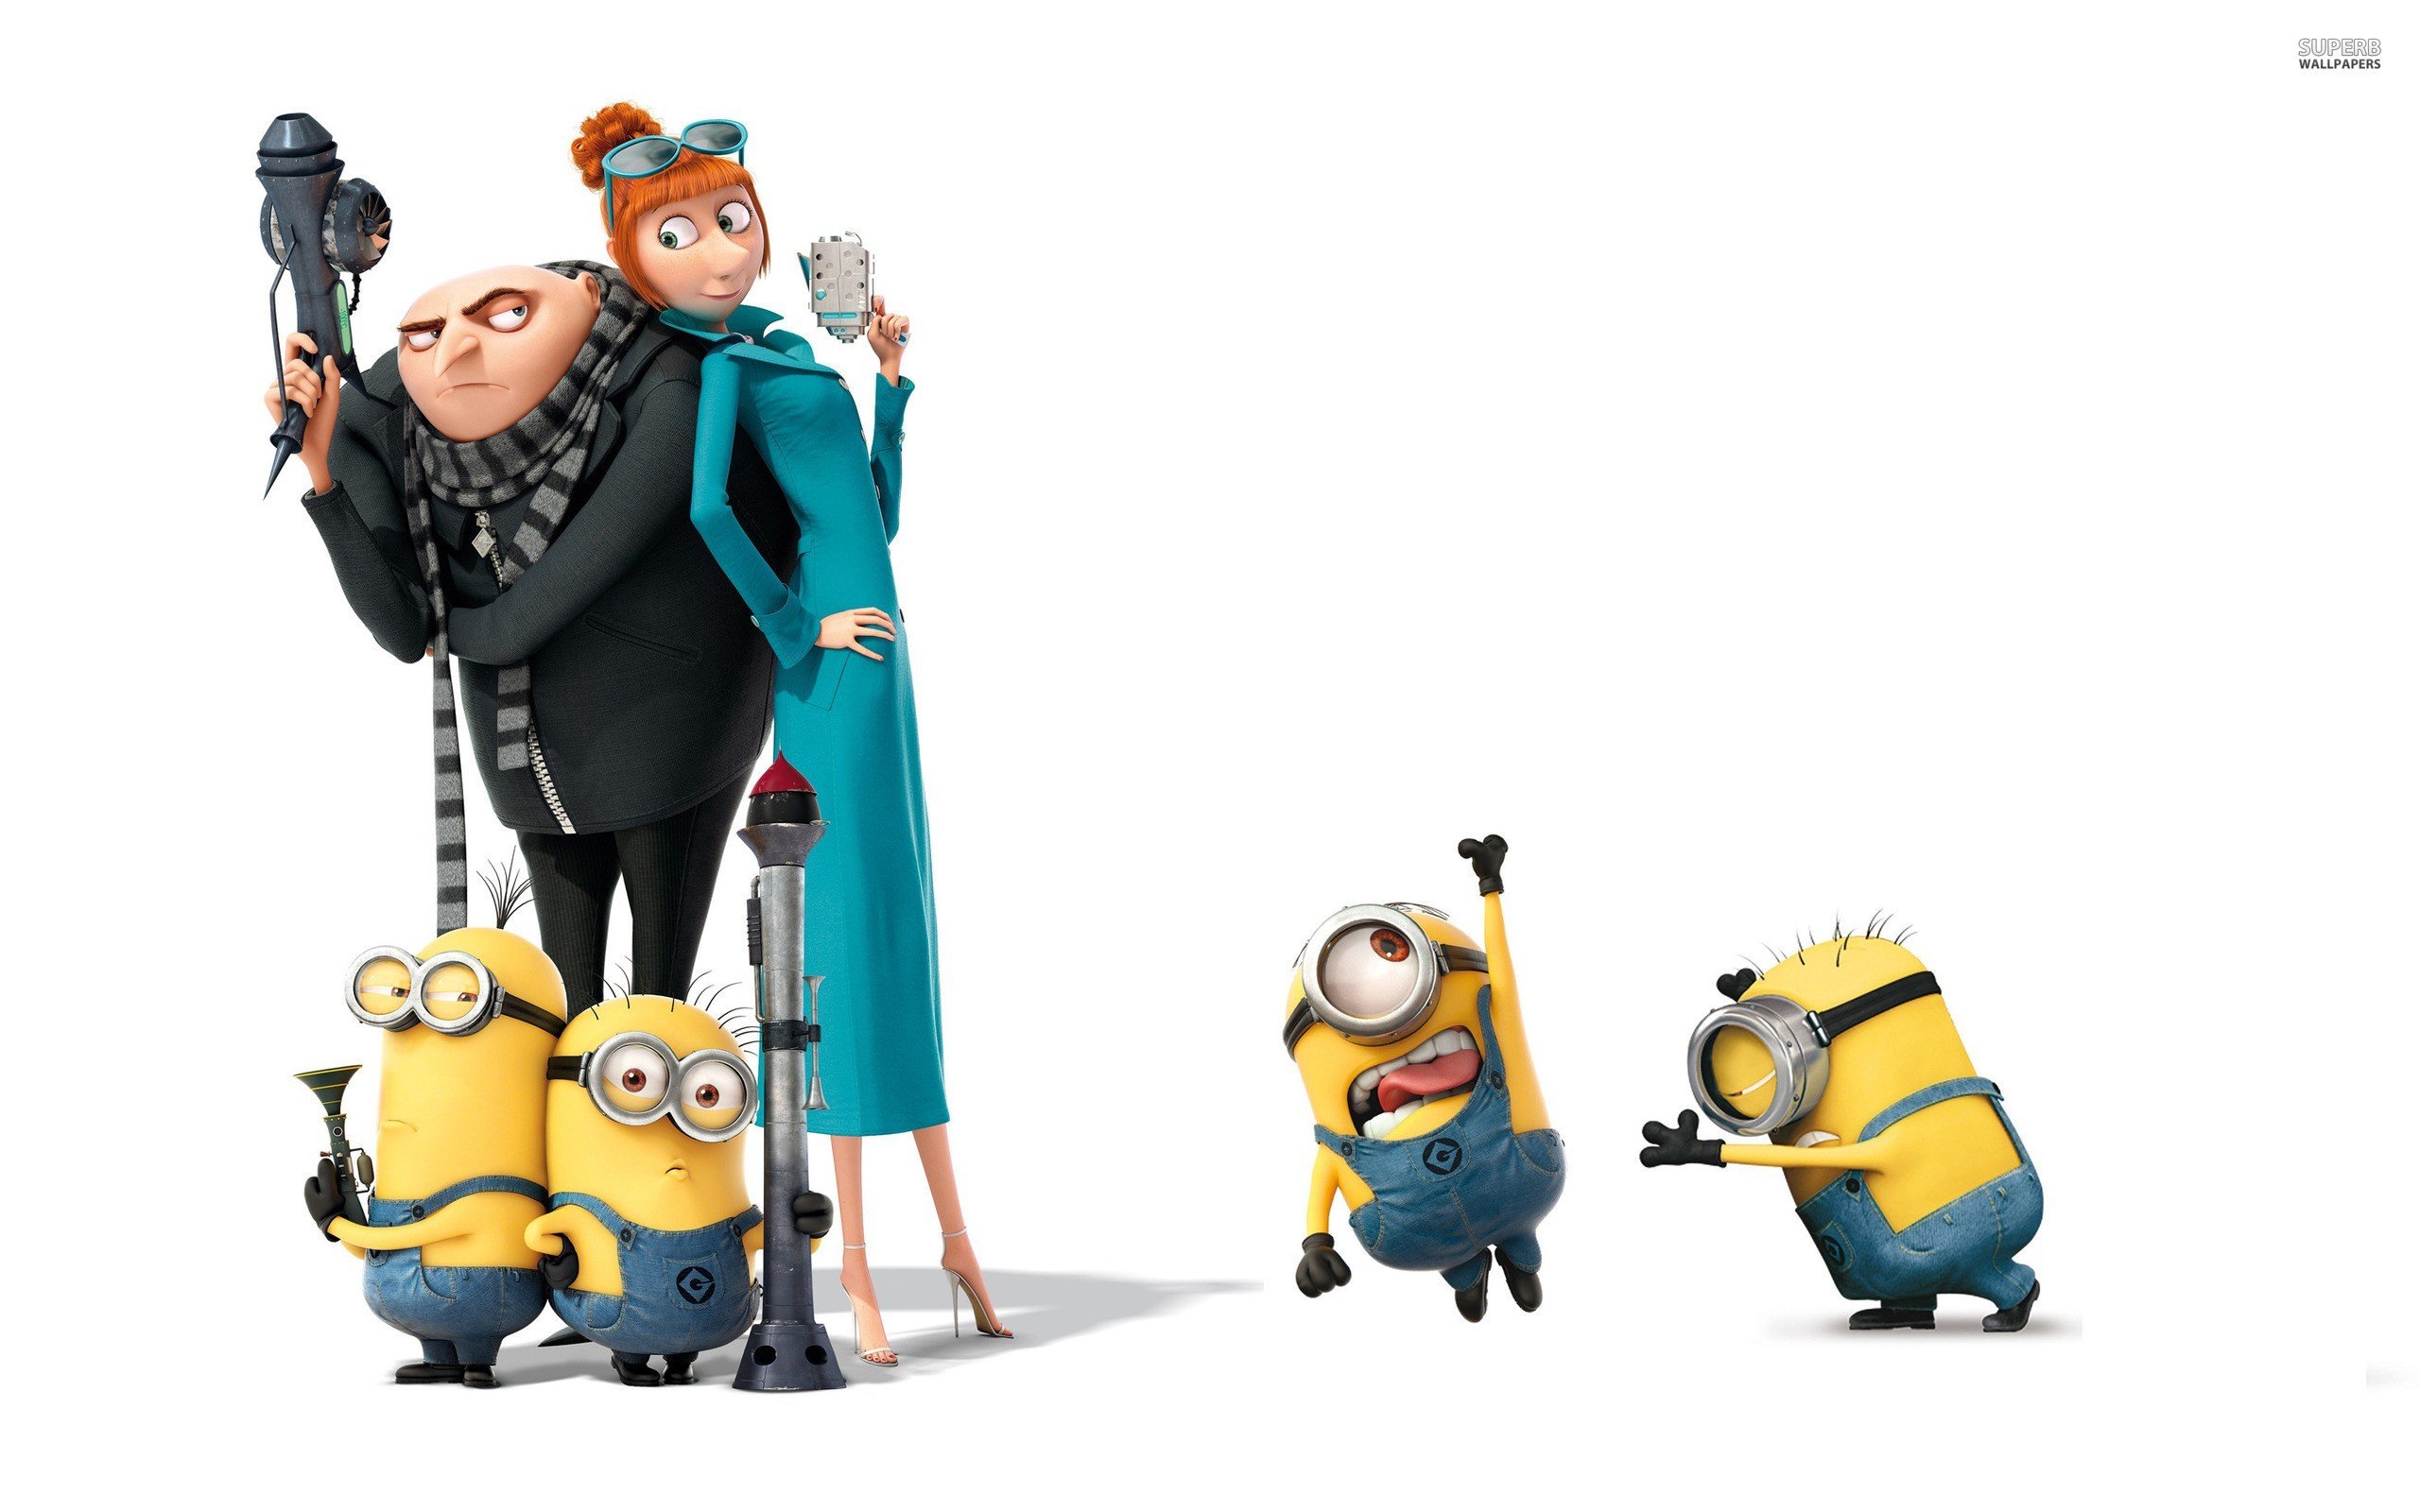 Download 1280x960 Wallpaper Despicable Me 3 Gru And Family Minions  Standard 43 Fullscreen 1280x960 Hd Image Background 19914